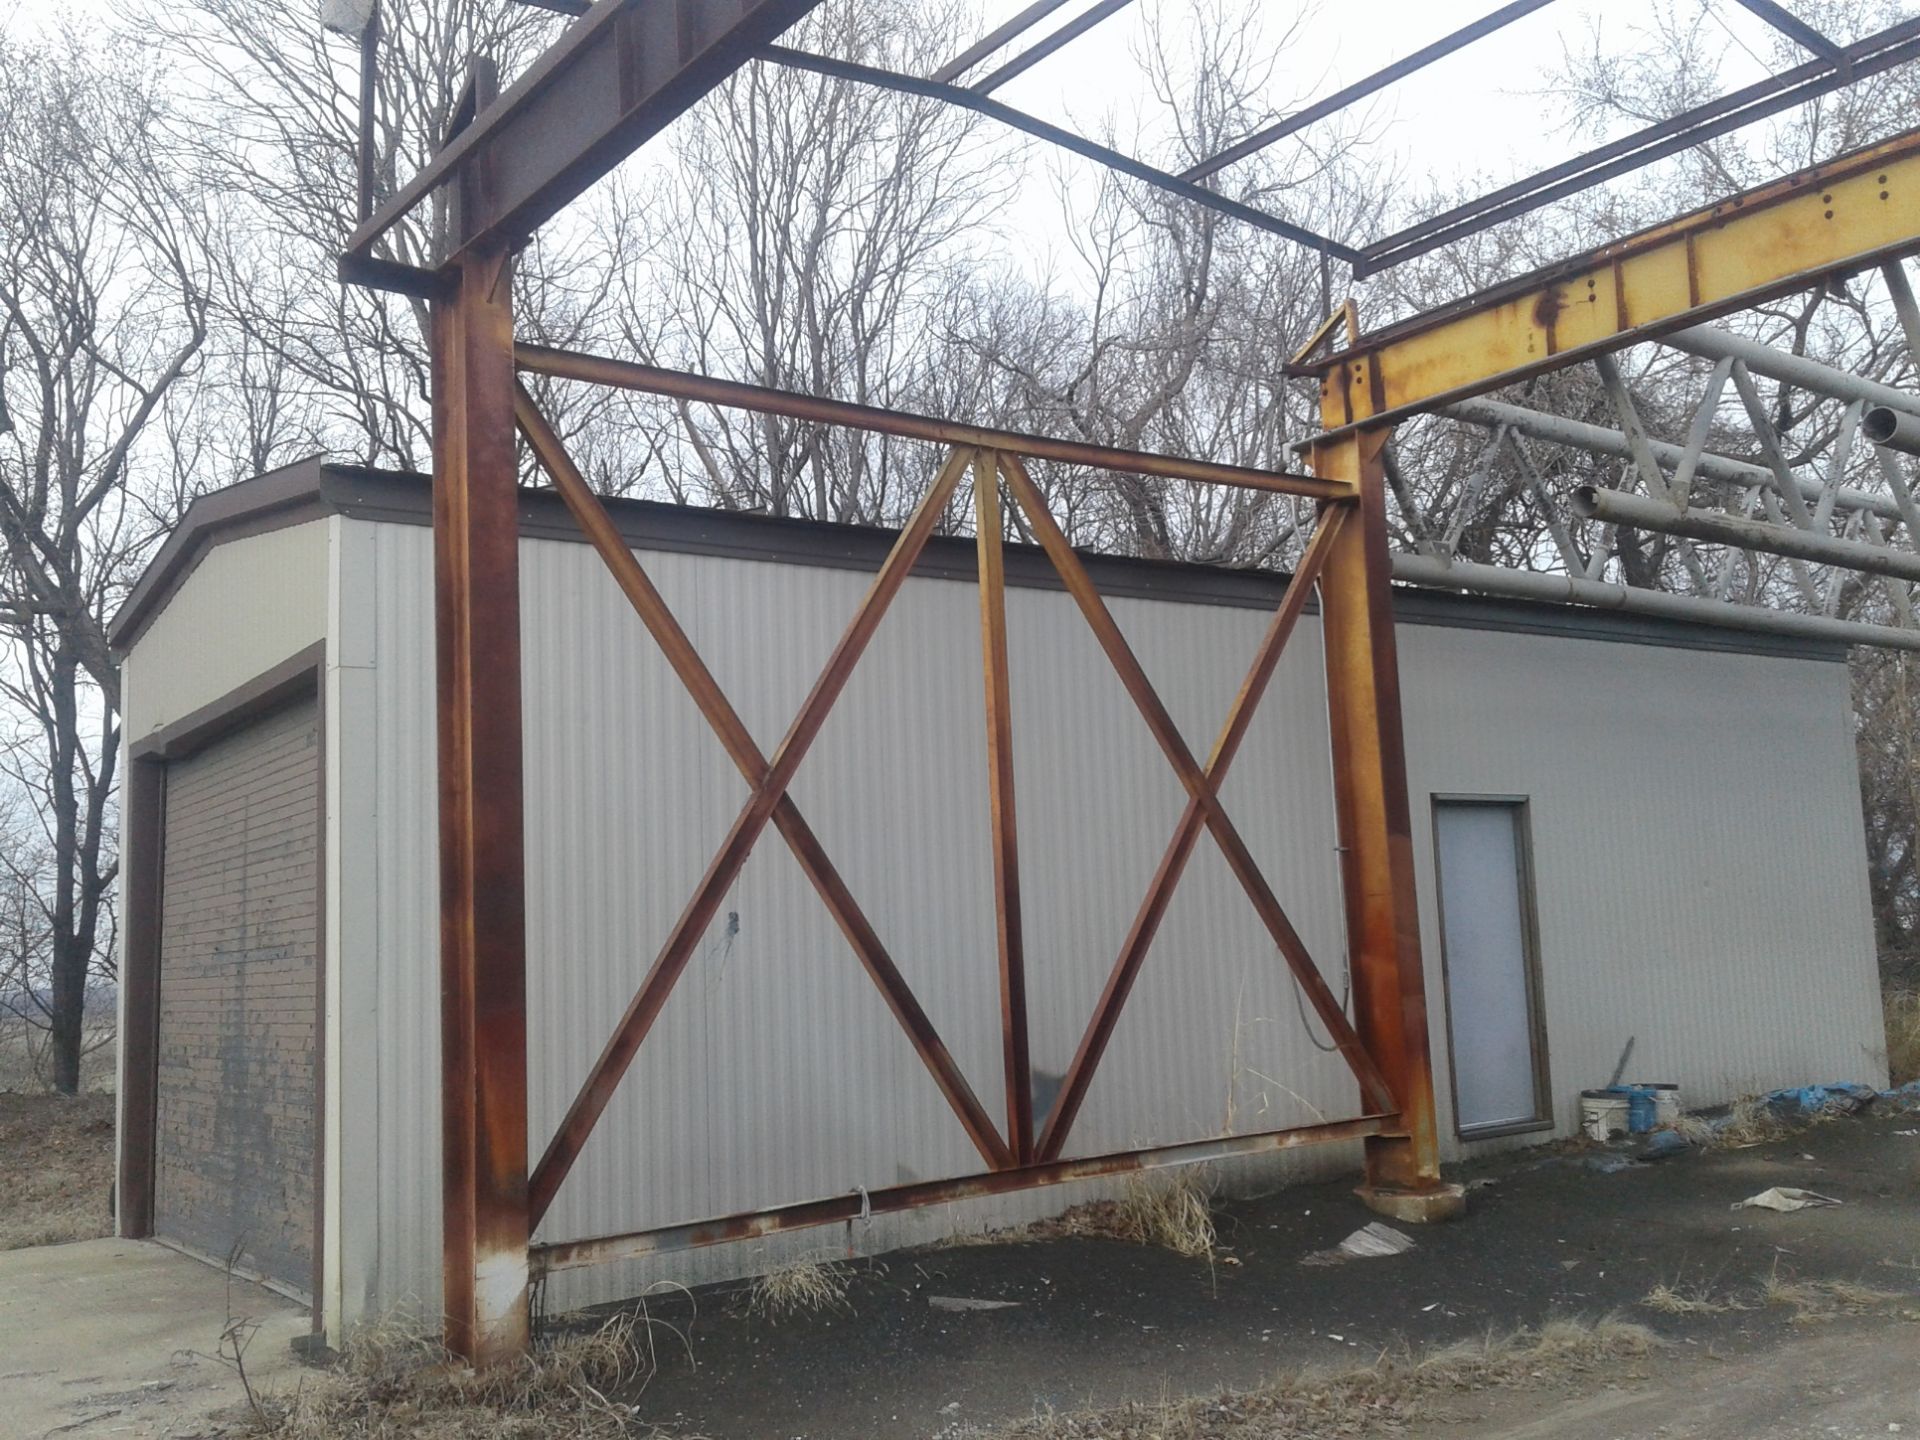 OUTDOOR FREE STANDING CRANE, APPROX 40' X 20', WITH OVERHEAD STEEL TROLLY - Image 4 of 8